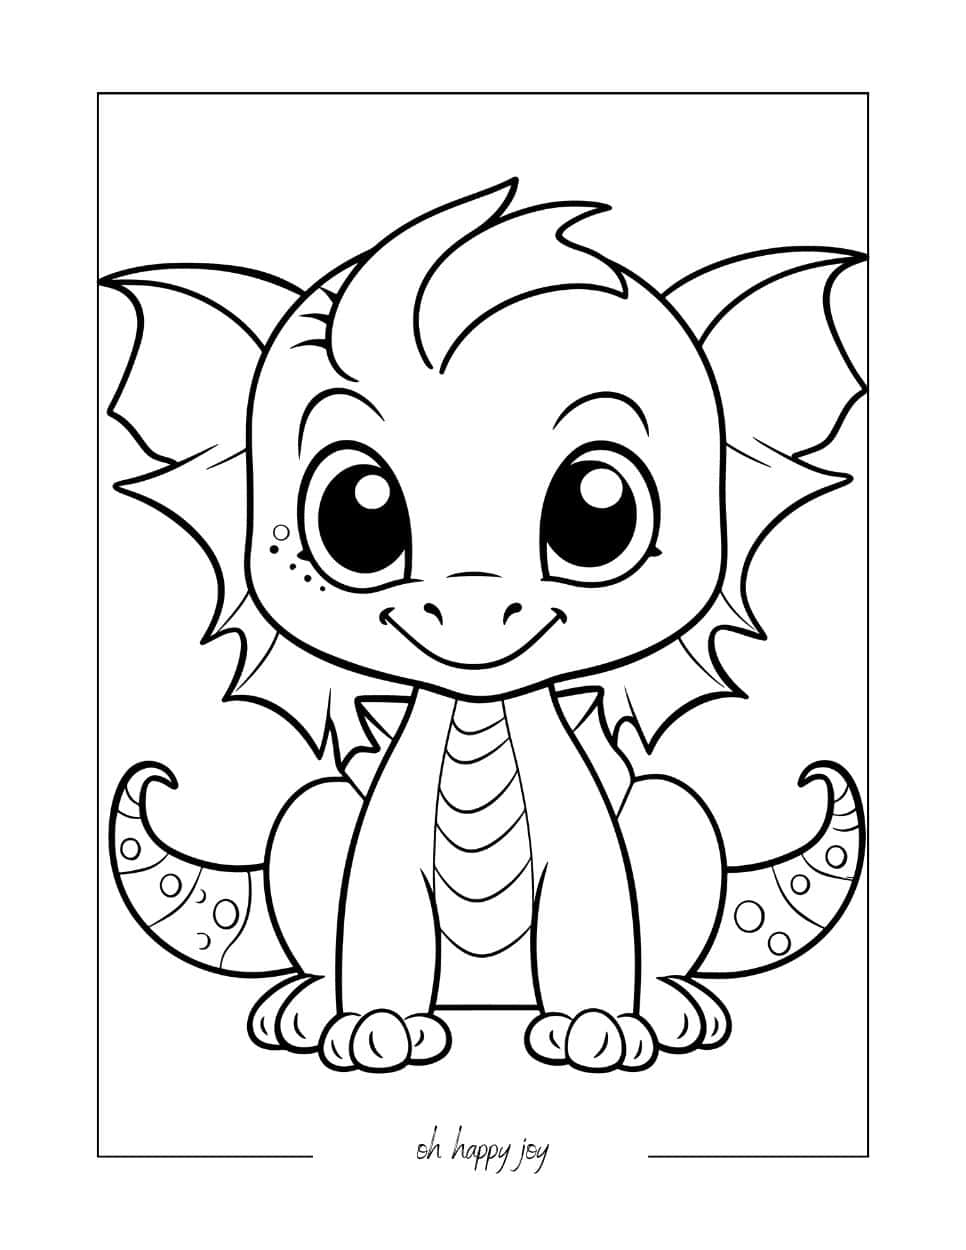 Dragon Coloring Page for Kids